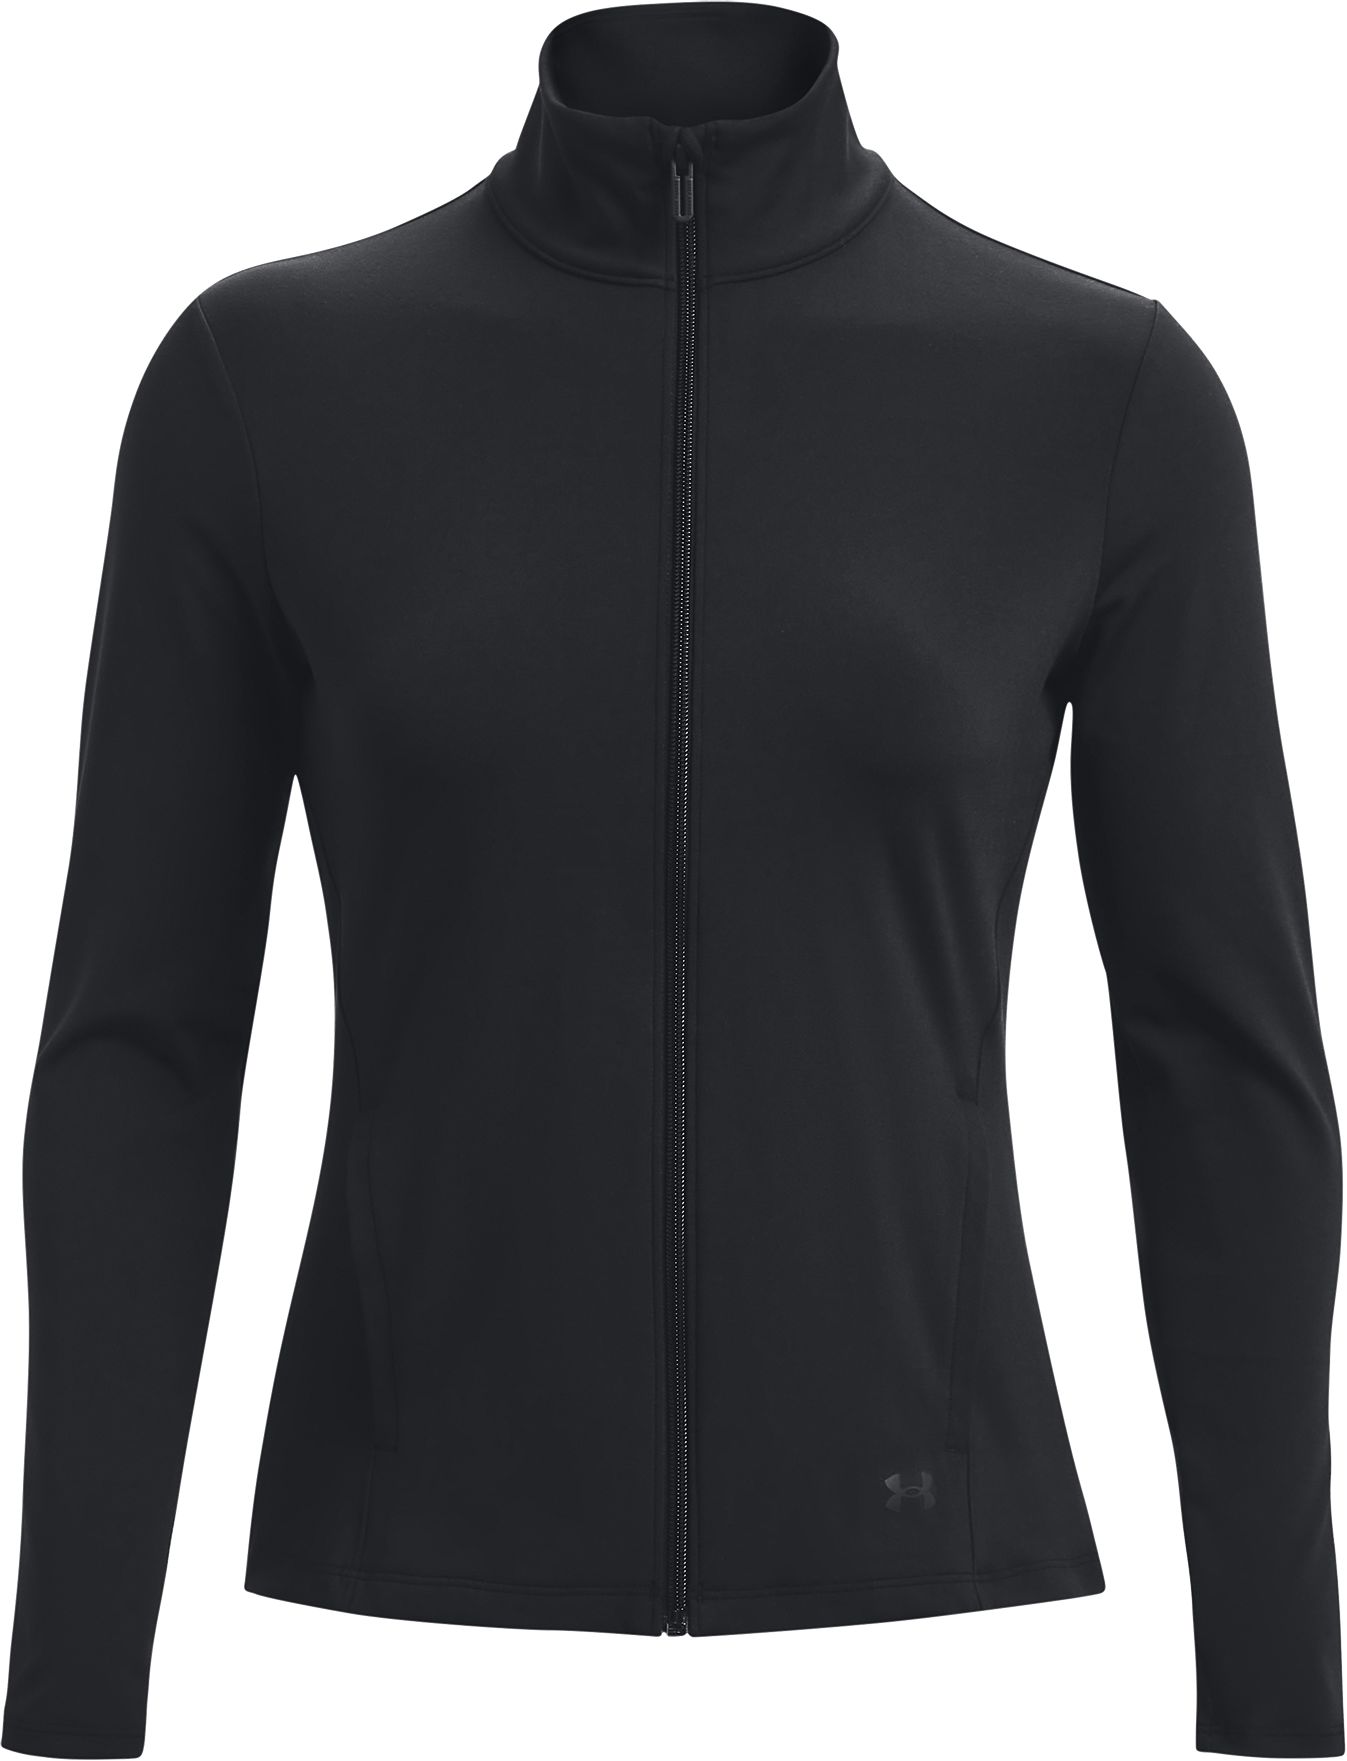 UNDER ARMOUR, MOTION JACKET